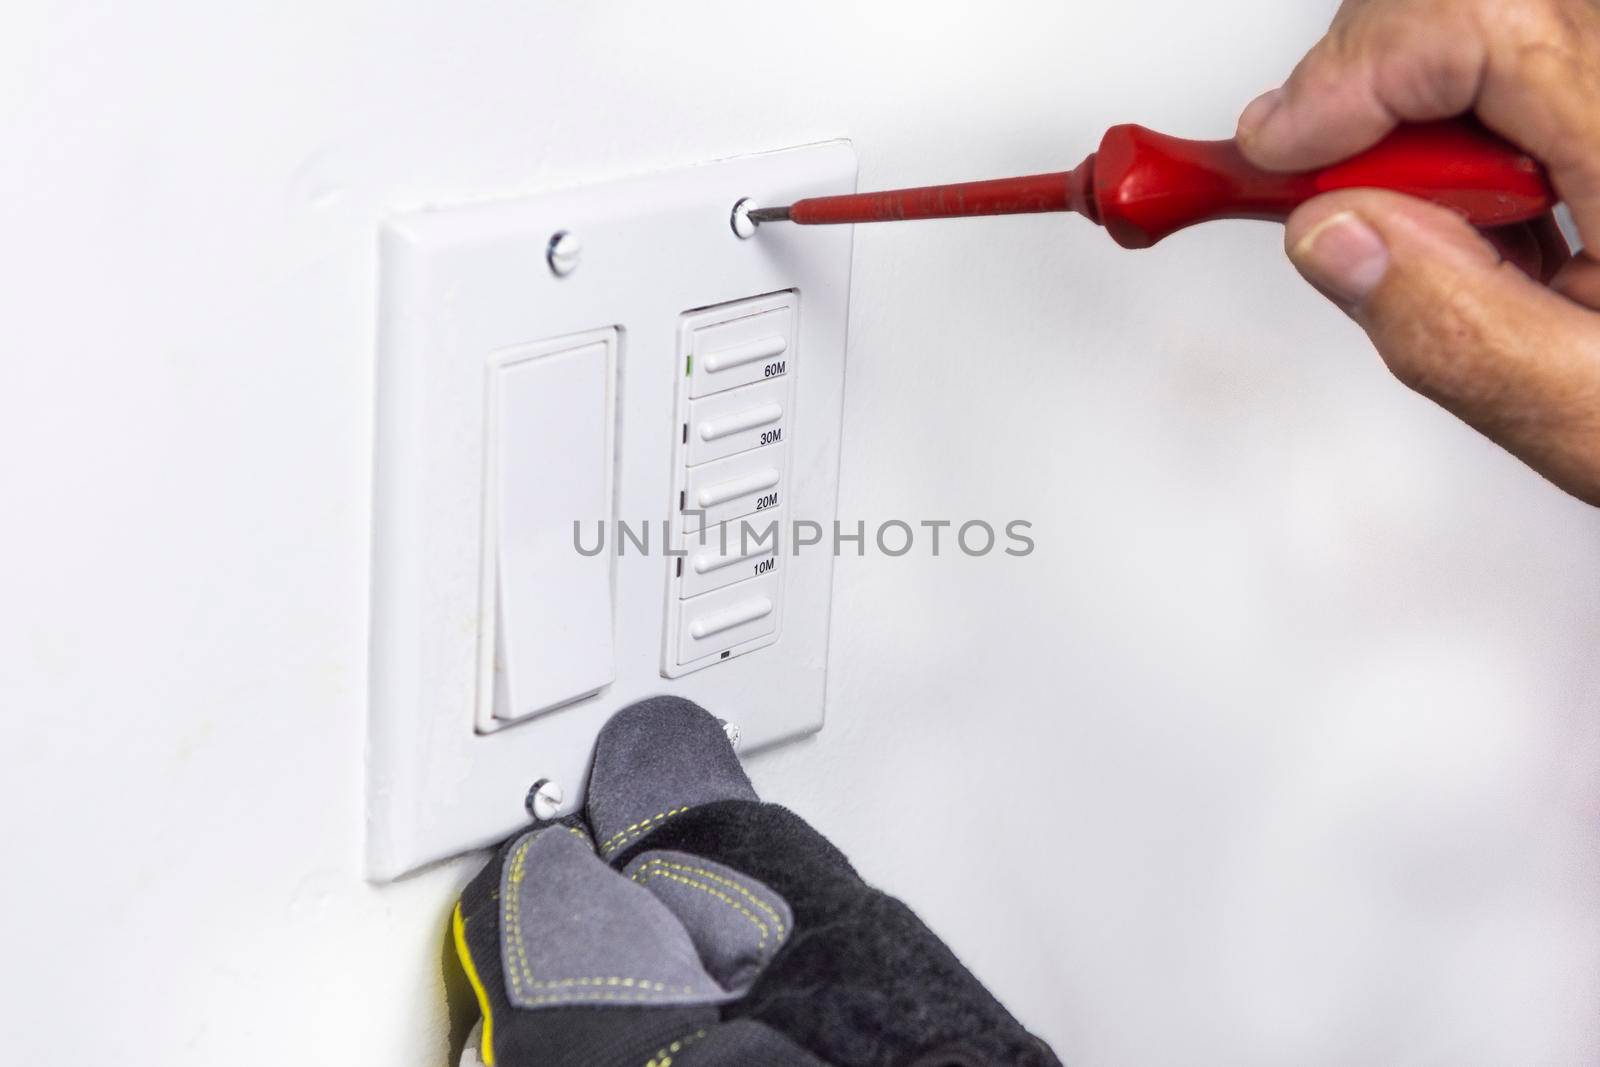 The electrician prepared the screws for securing the switch cover and inserted them into the holes, holding them in place with a screwdriver.